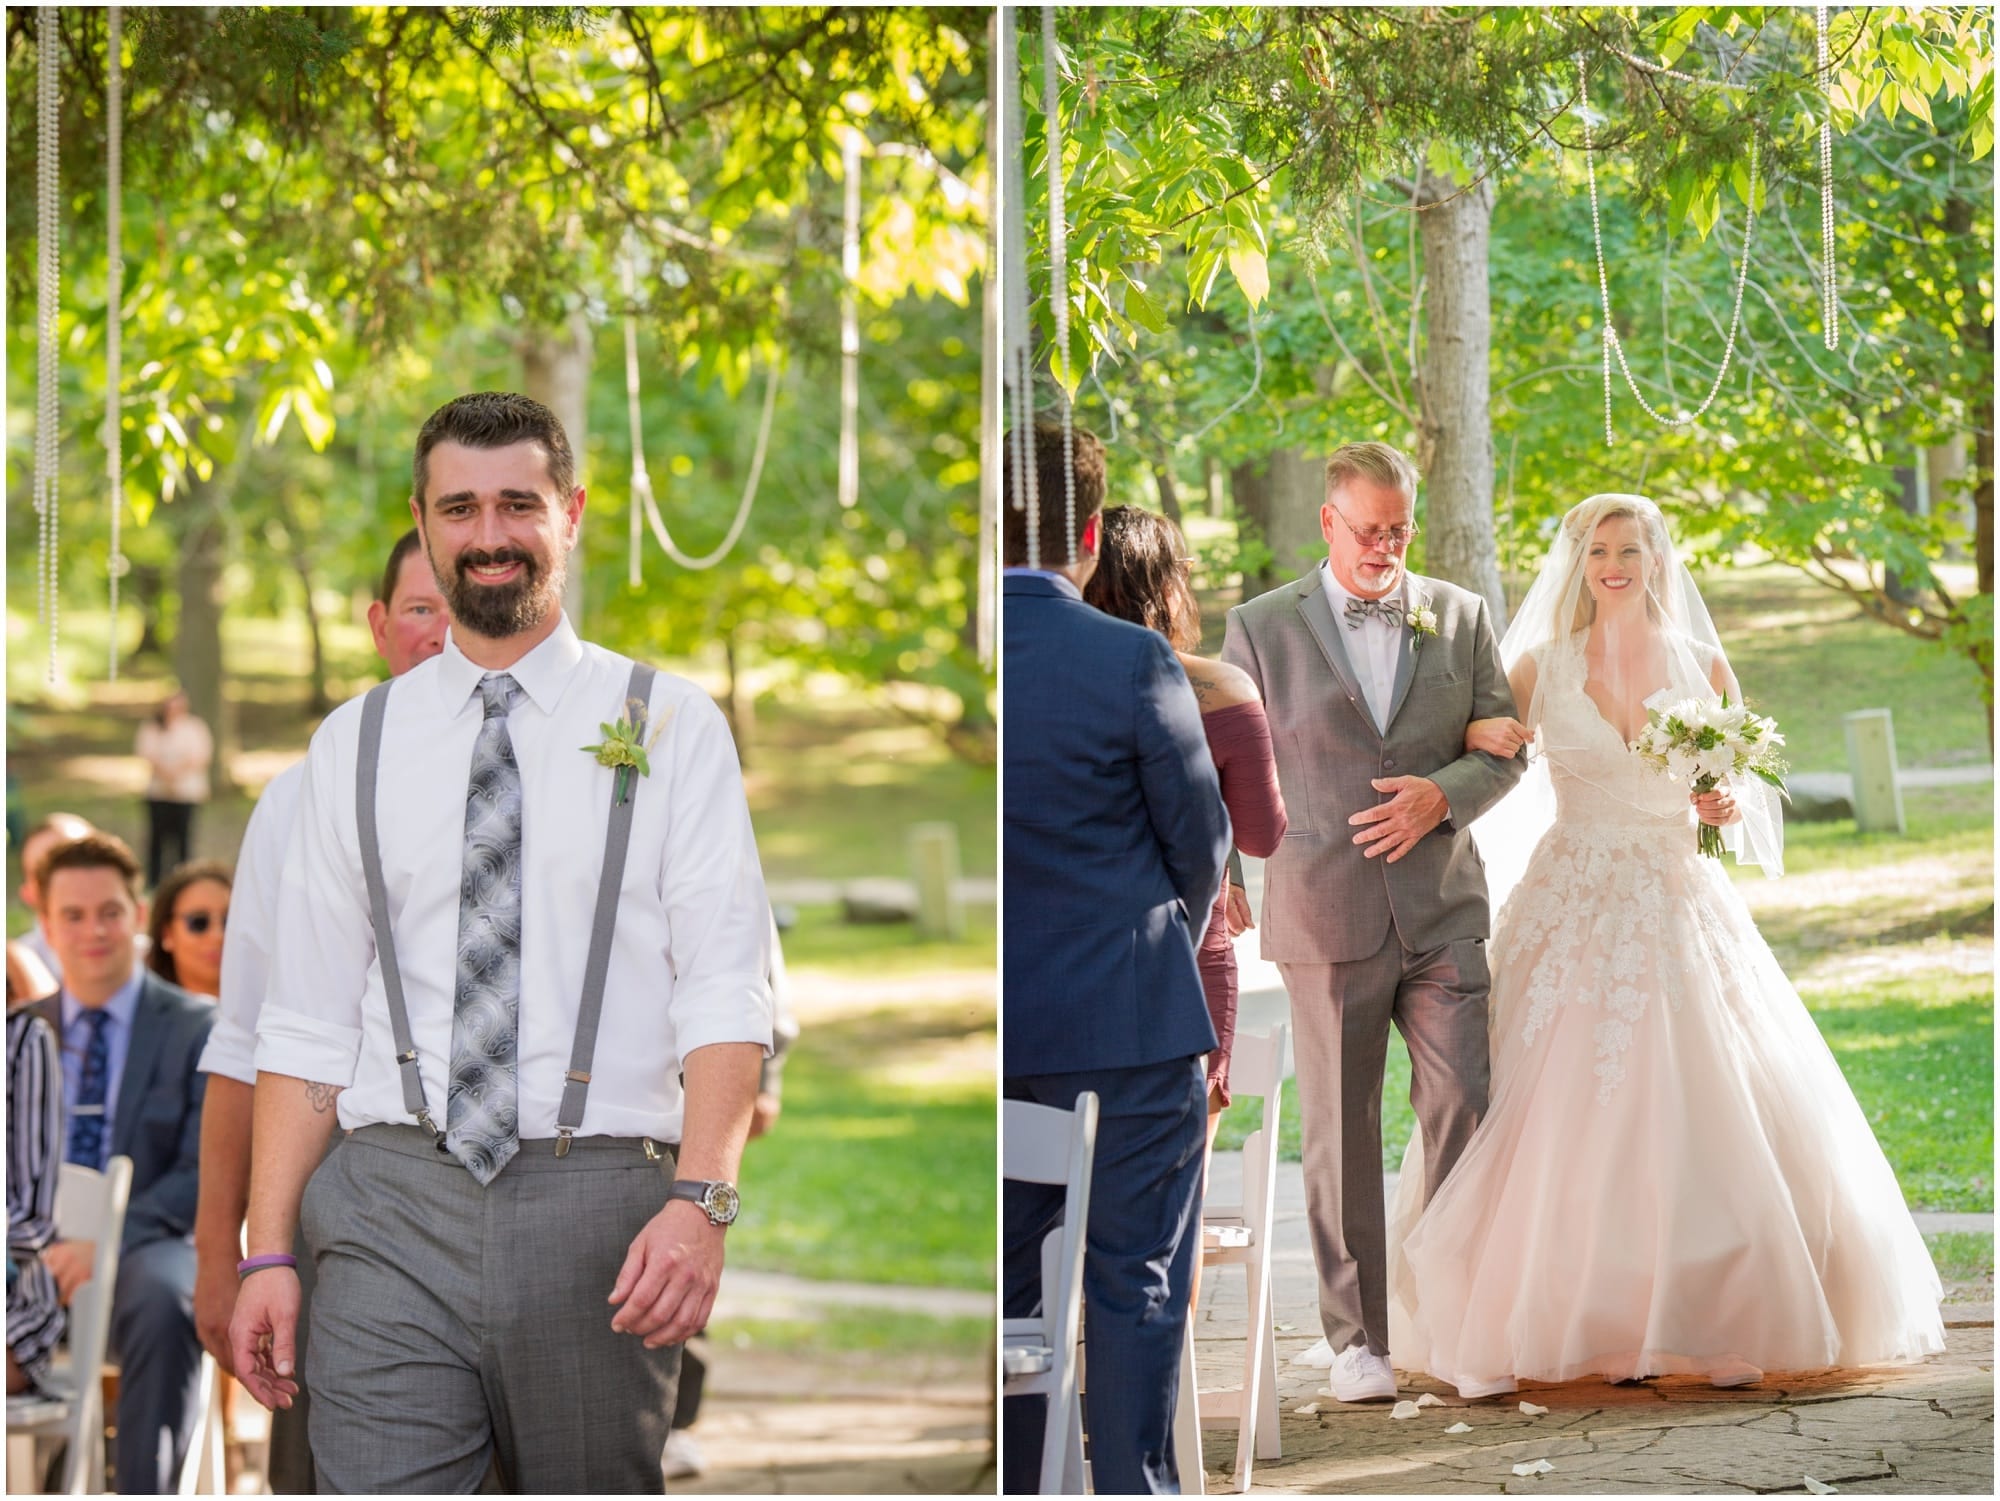 Starved Rock State Park Lodge Wedding Photographer wedding ceremony outdoors at Lodge